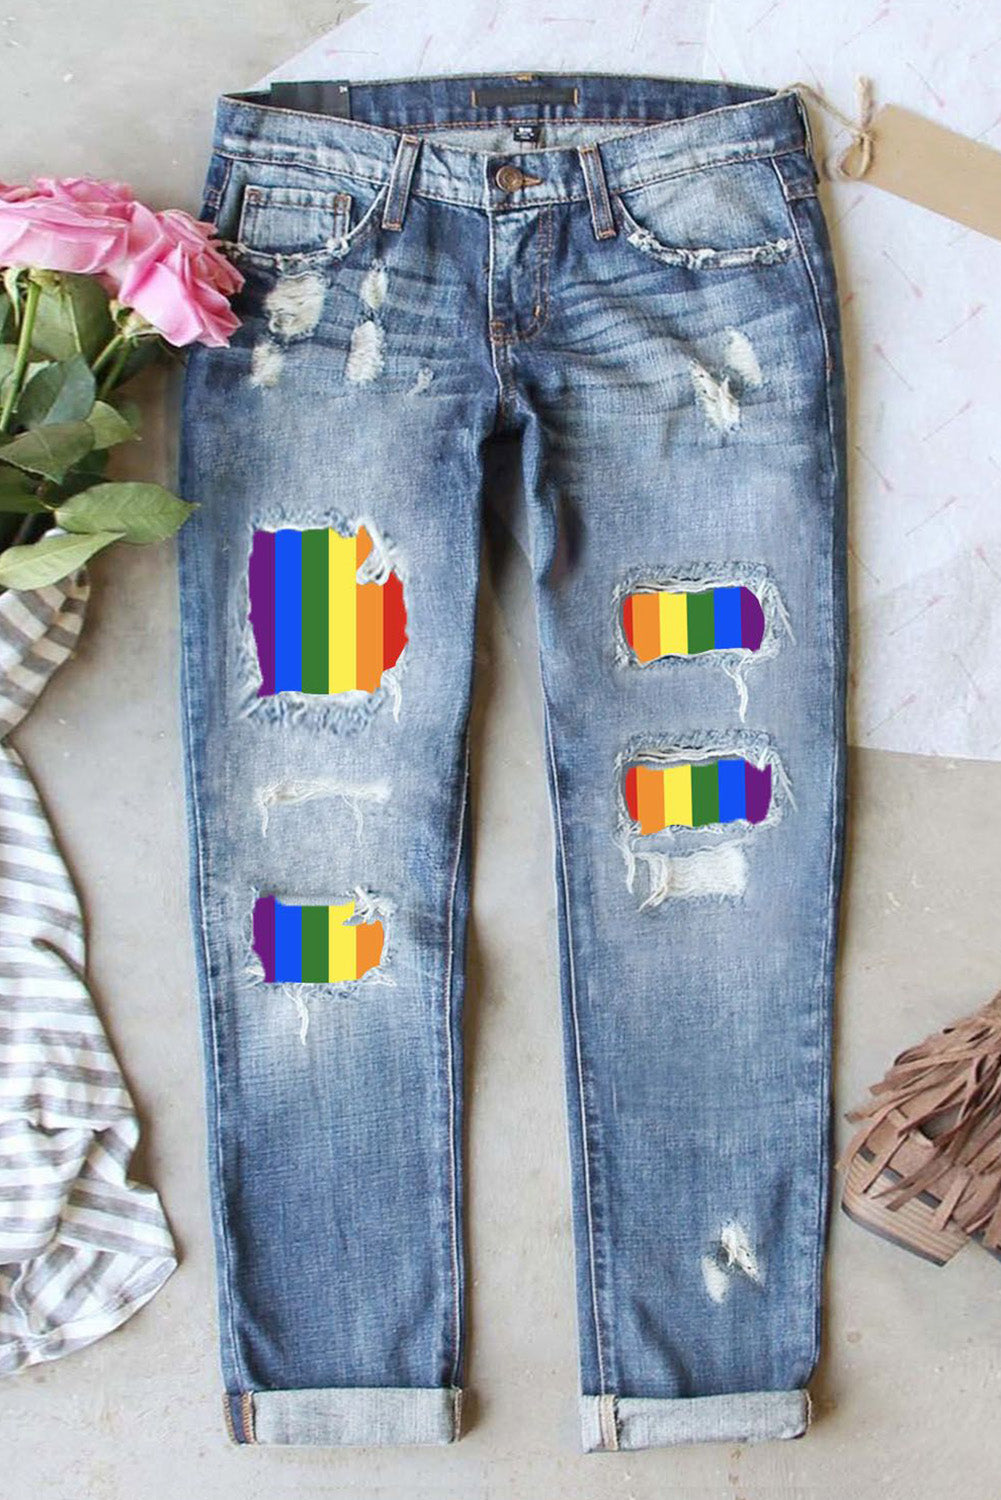 LC787948-4-S, LC787948-4-M, LC787948-4-L, LC787948-4-XL, LC787948-4-2XL, Sky Blue Womens Rainbow Striped Denim Pants Patch Ripped Boyfriend Distressed Ripped Jeans